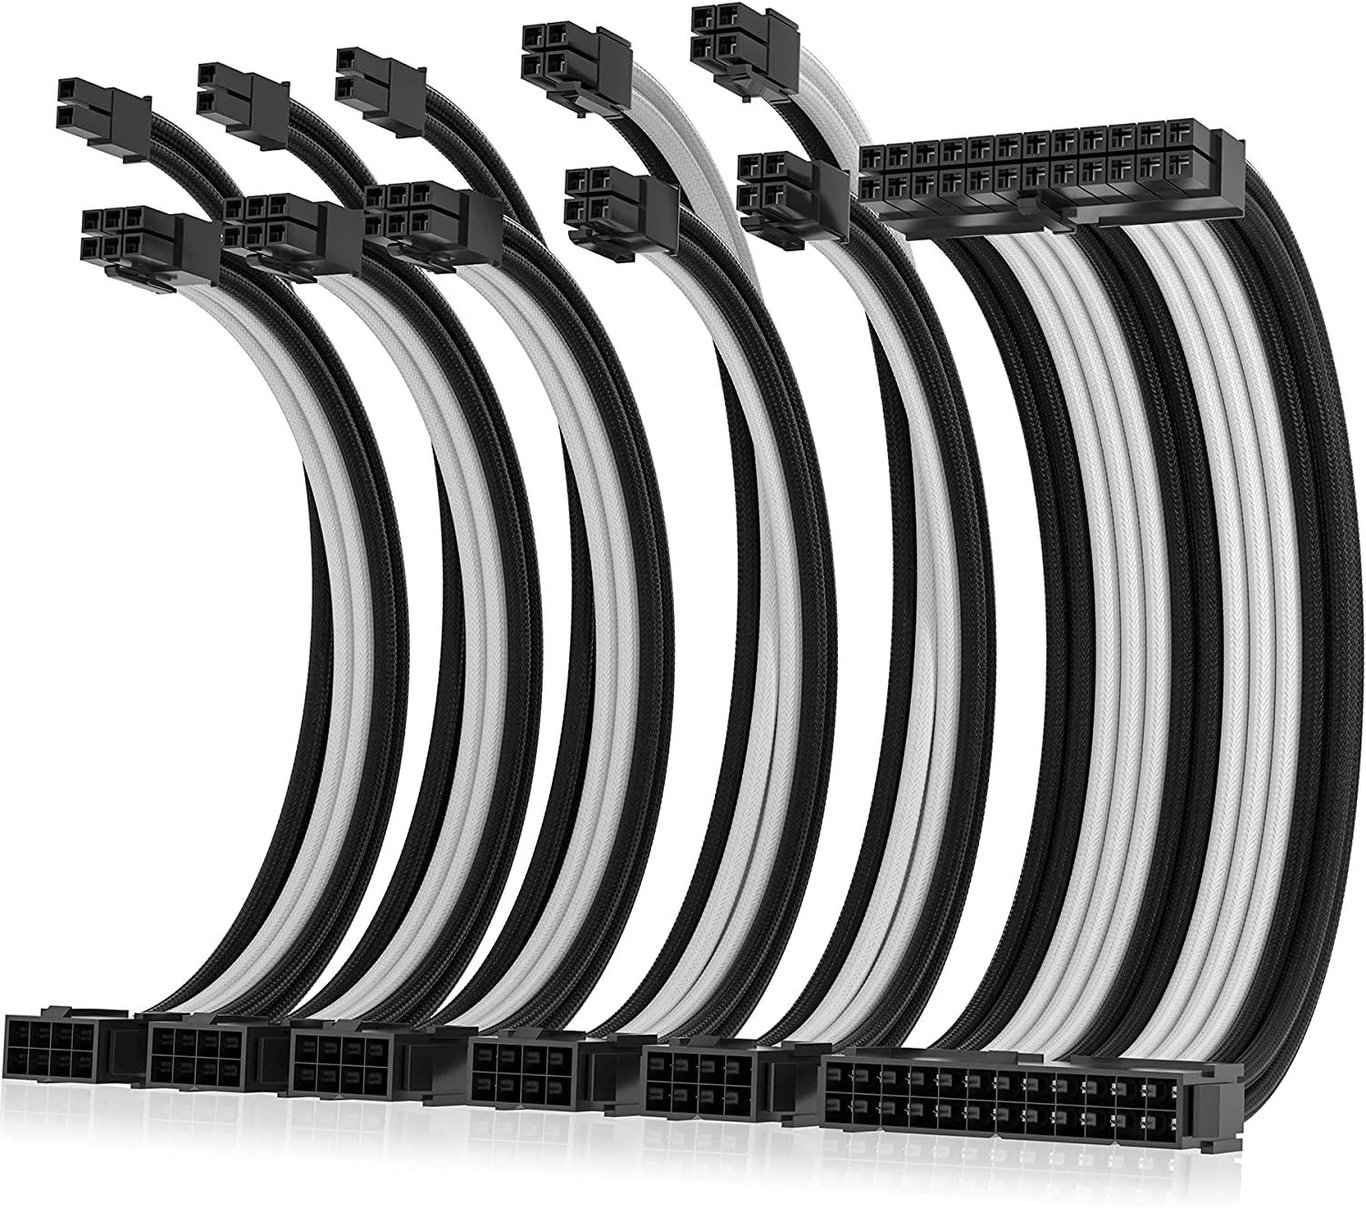 AsiaHorse Pro-6 Sleeved Extension Cable Kit - Black/White 黑白色